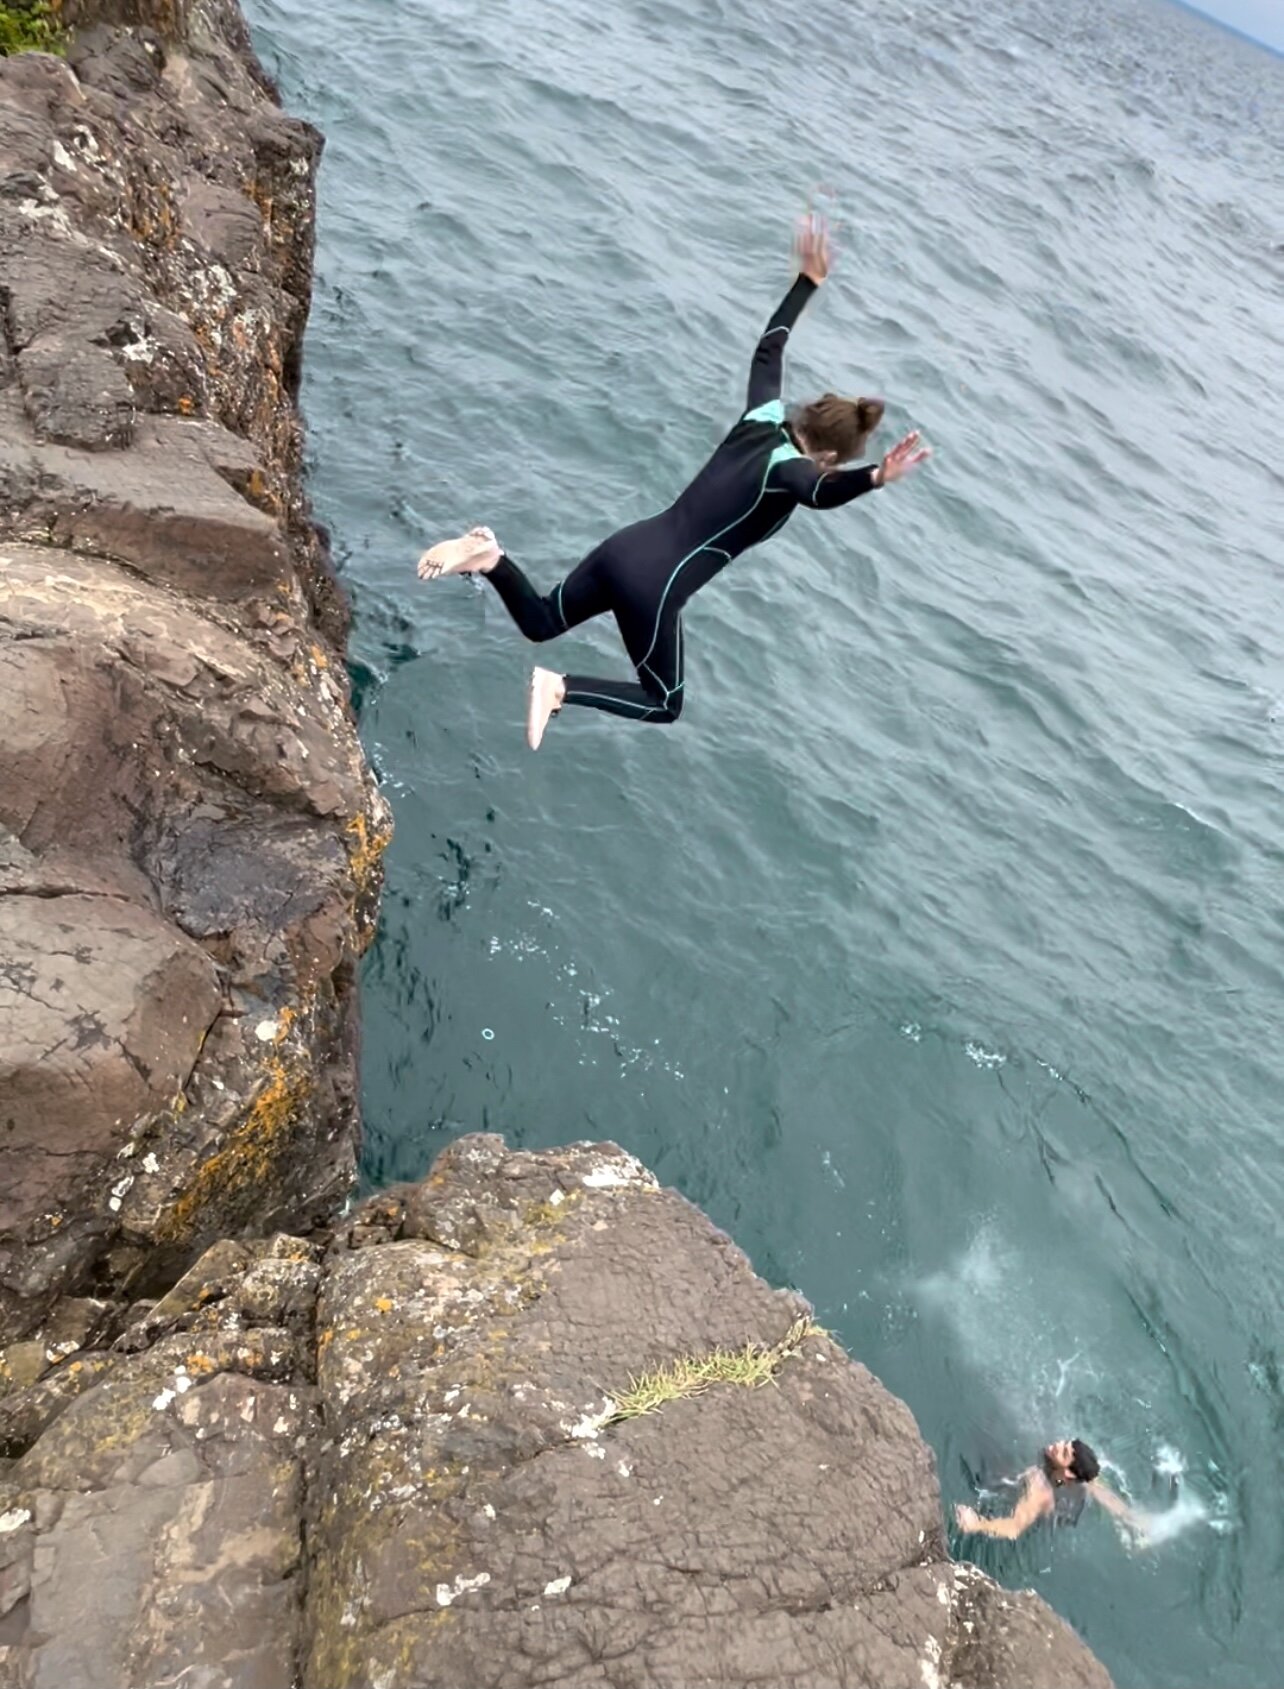  Black Rocks is also where all the cool kids go to jump off a 30-foot cliff… into Lake Superior. The summer water temperatures of around 52 degrees is as warm as Lake Superior gets in Marquette. Another popular time to jump is right after the ice mel